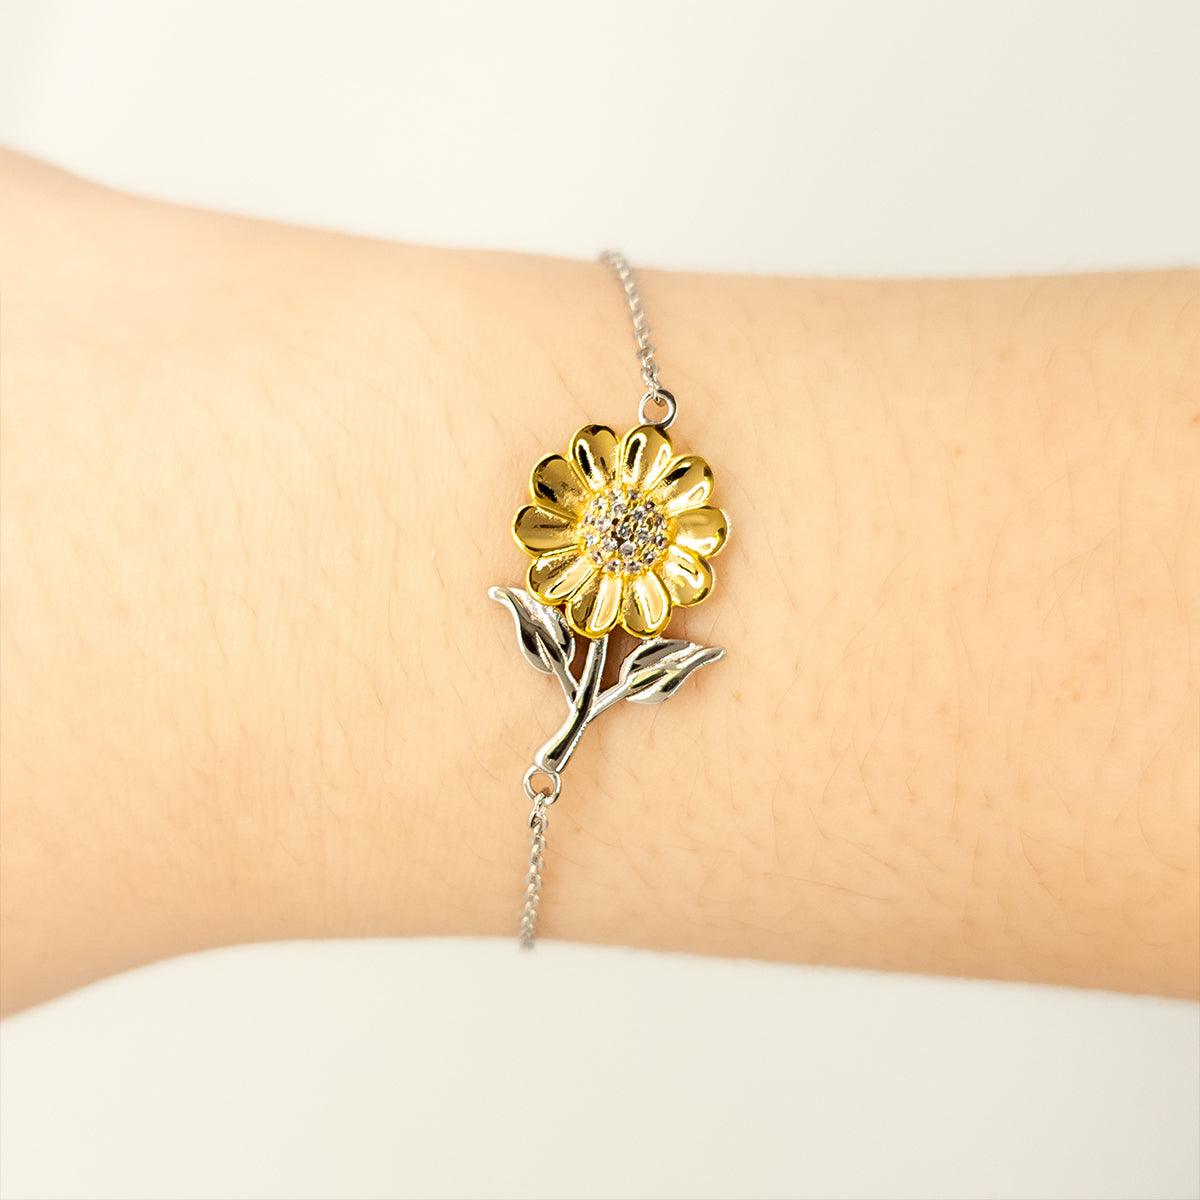 Sunflower Bracelet for Grandparents Present, Grandparents Always follow your dreams, never forget how amazing you are, Grandparents Birthday Christmas Gifts Jewelry for Girls Boys Teen Men Women - Mallard Moon Gift Shop